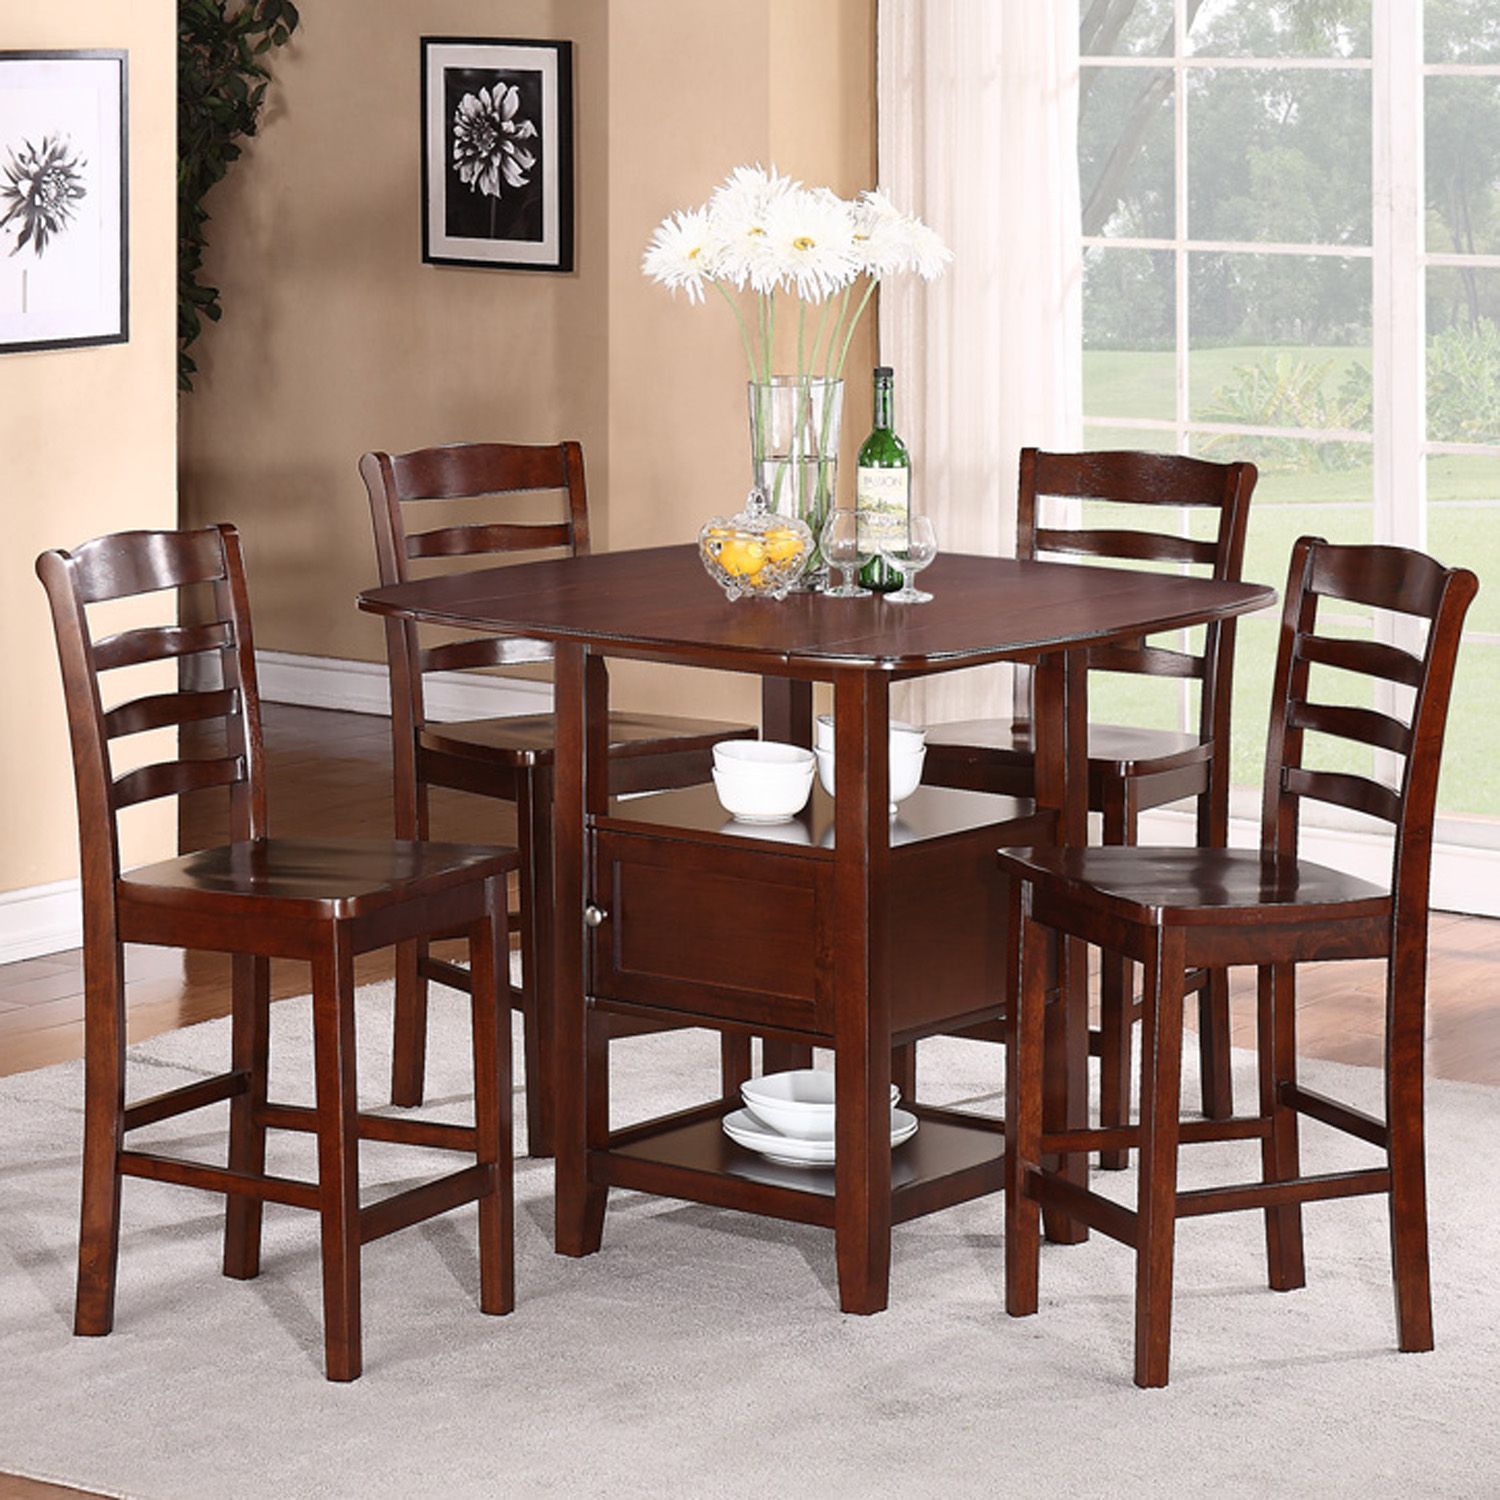 dining table set 5pc dining set with storage NQSQVQD